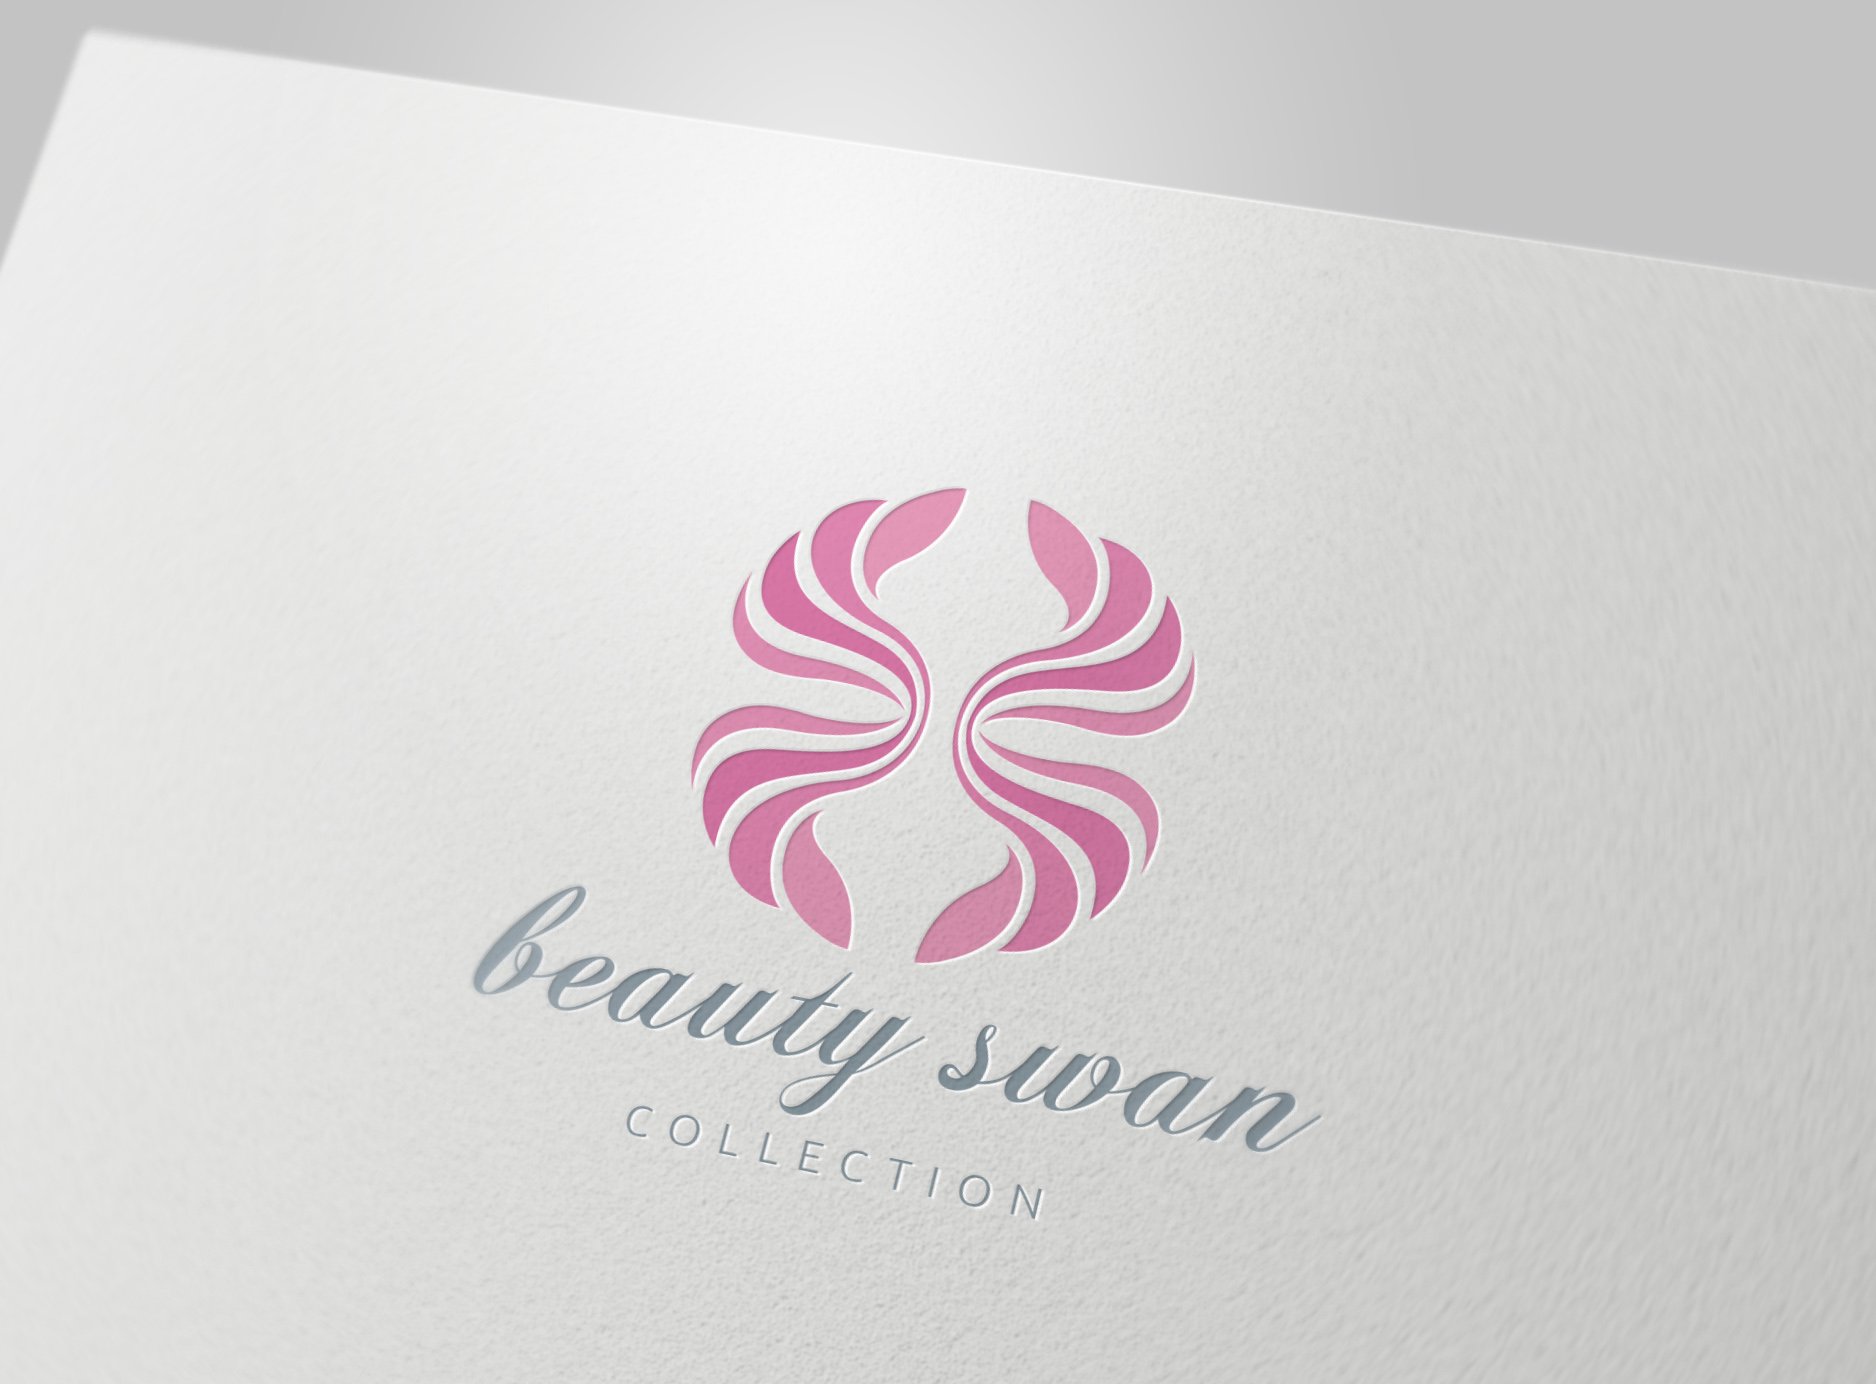 White paper with pink swan.